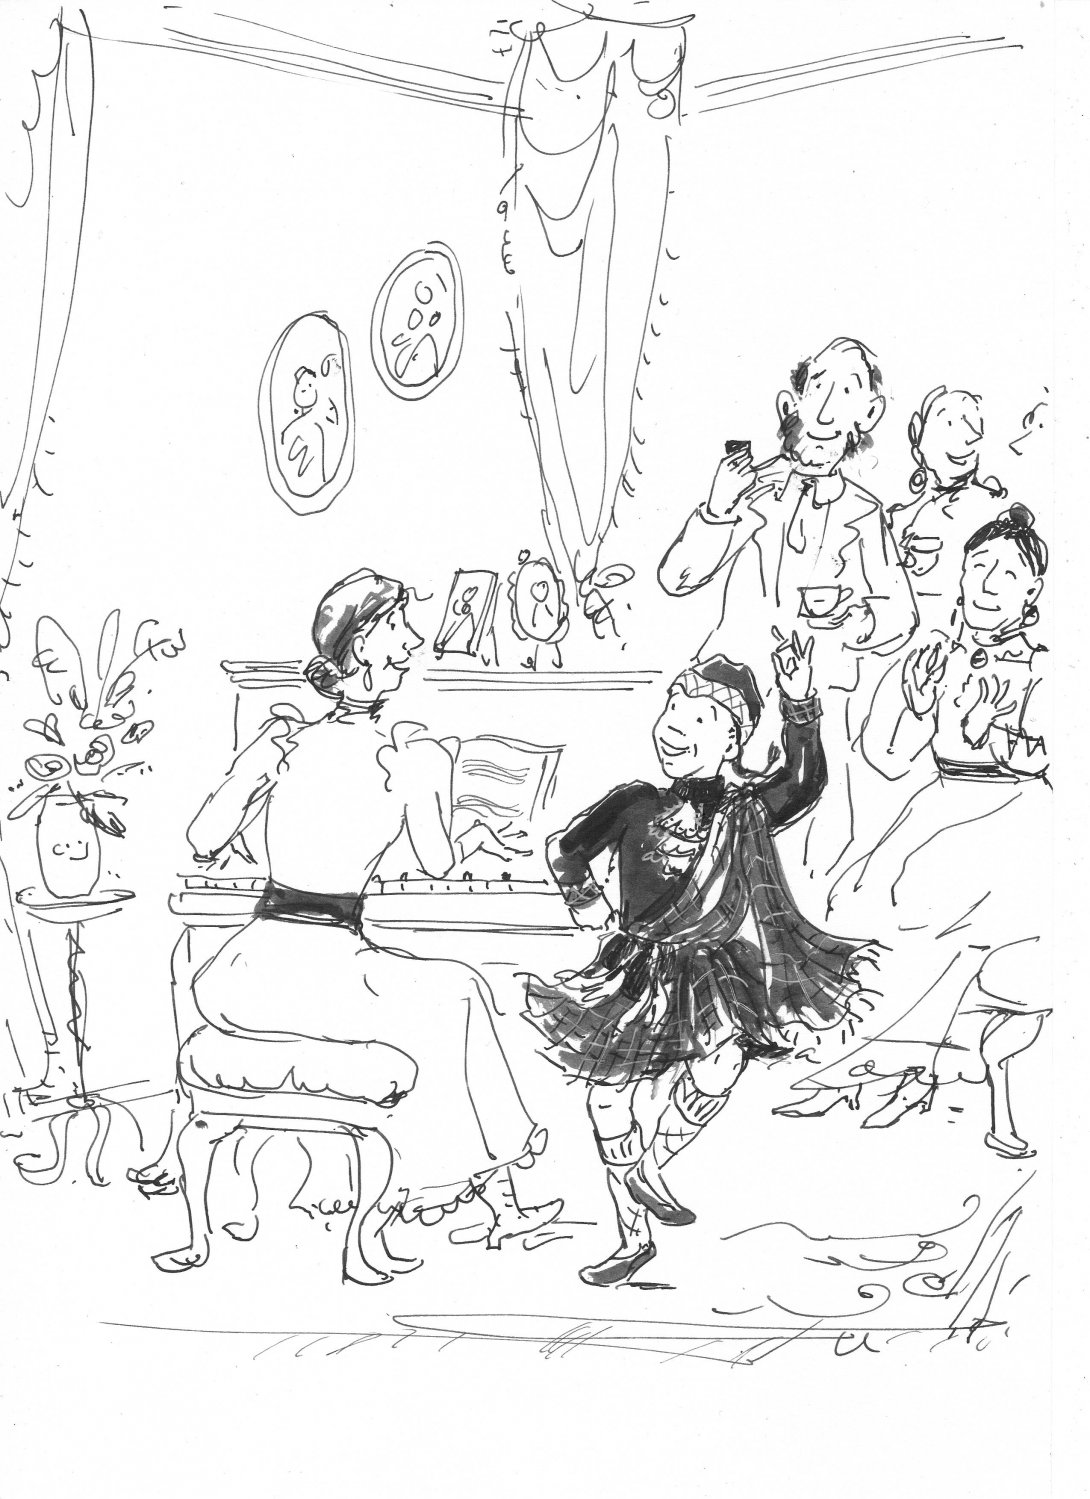 Sketch  of a boy dancing next to a piano being played by a woman in a long dress. Behind the piano are three other adults listening to the piano and watching him dance